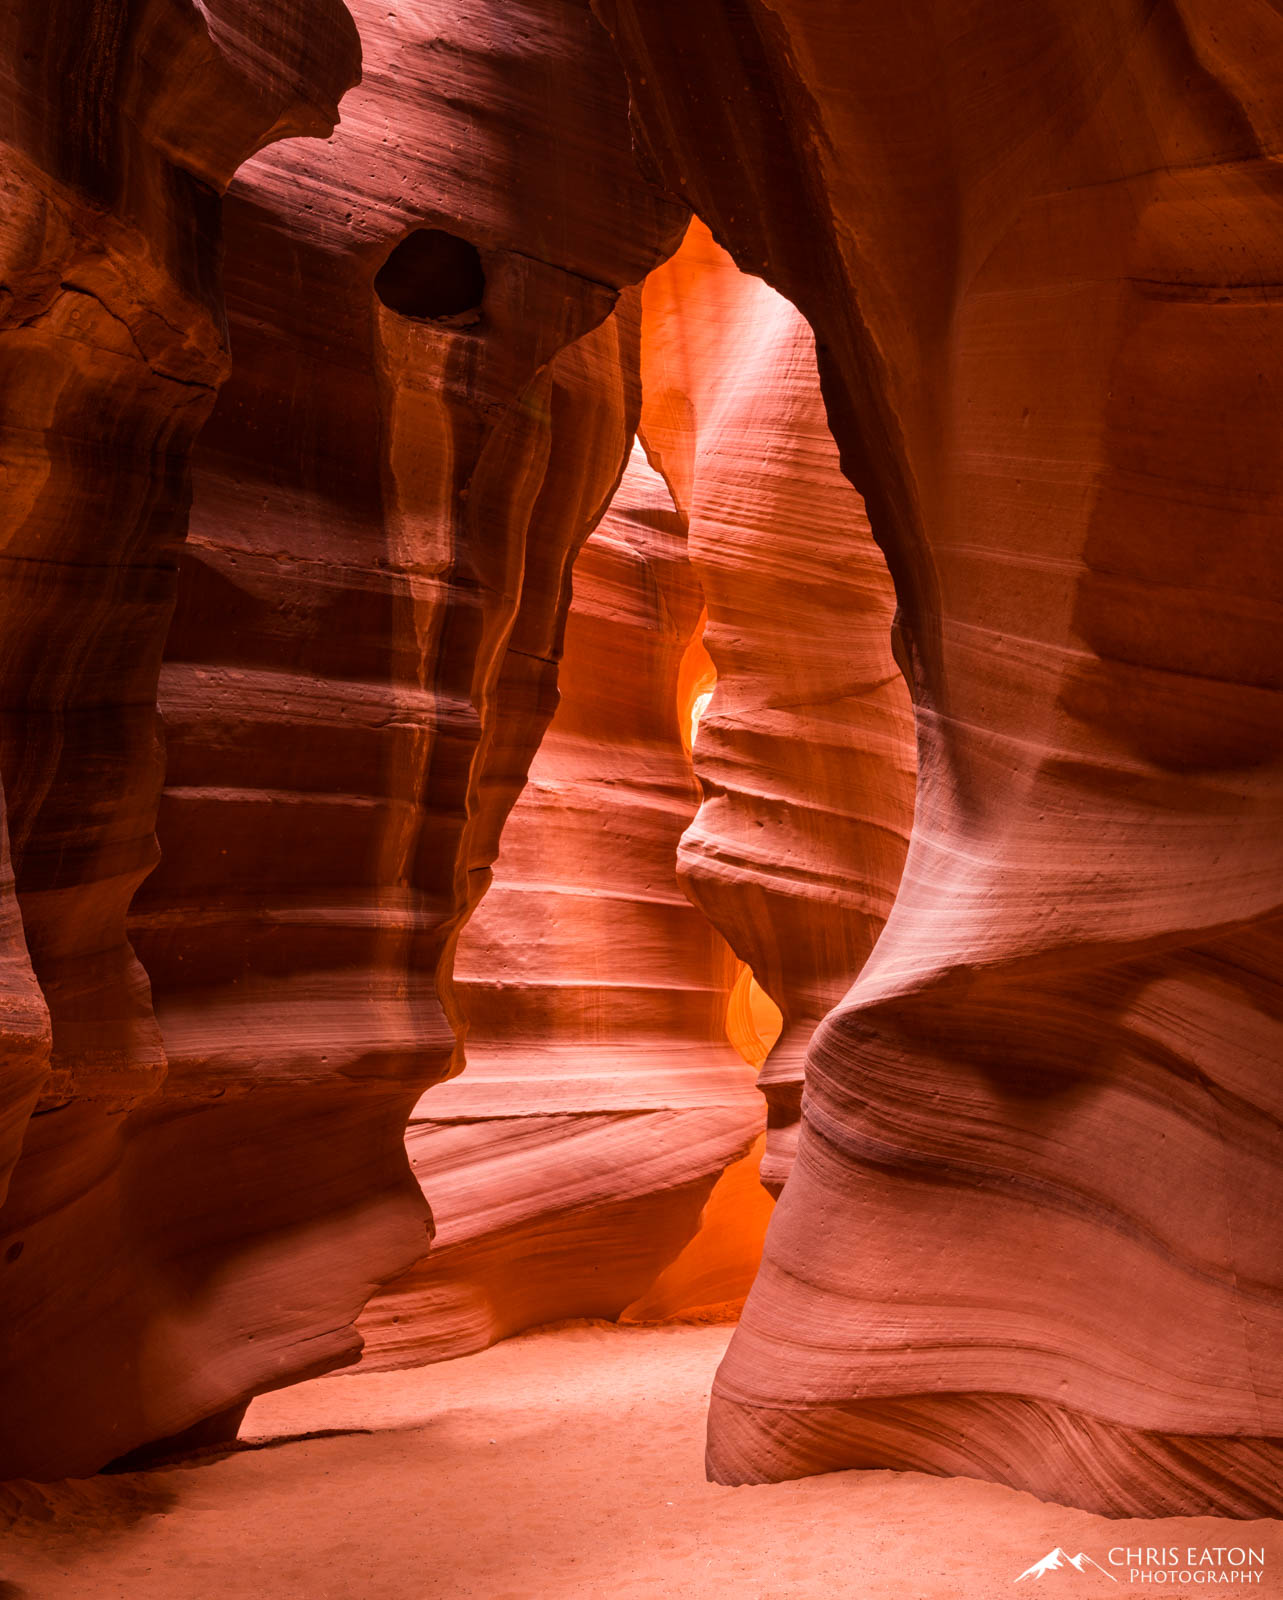 When looking back towards the entrance of Upper Antelope Canyon, the outline of a sitting bear emerges from the walls when bright...